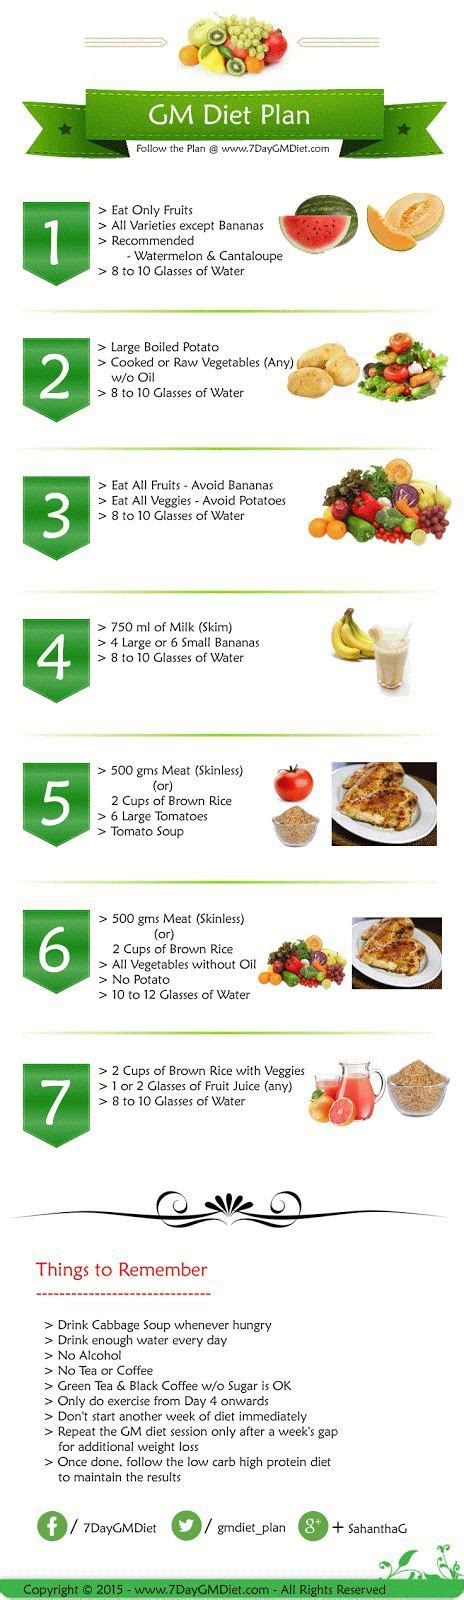 Simple Printable Meal Plans To Help You Lose Weight Meal Plan For